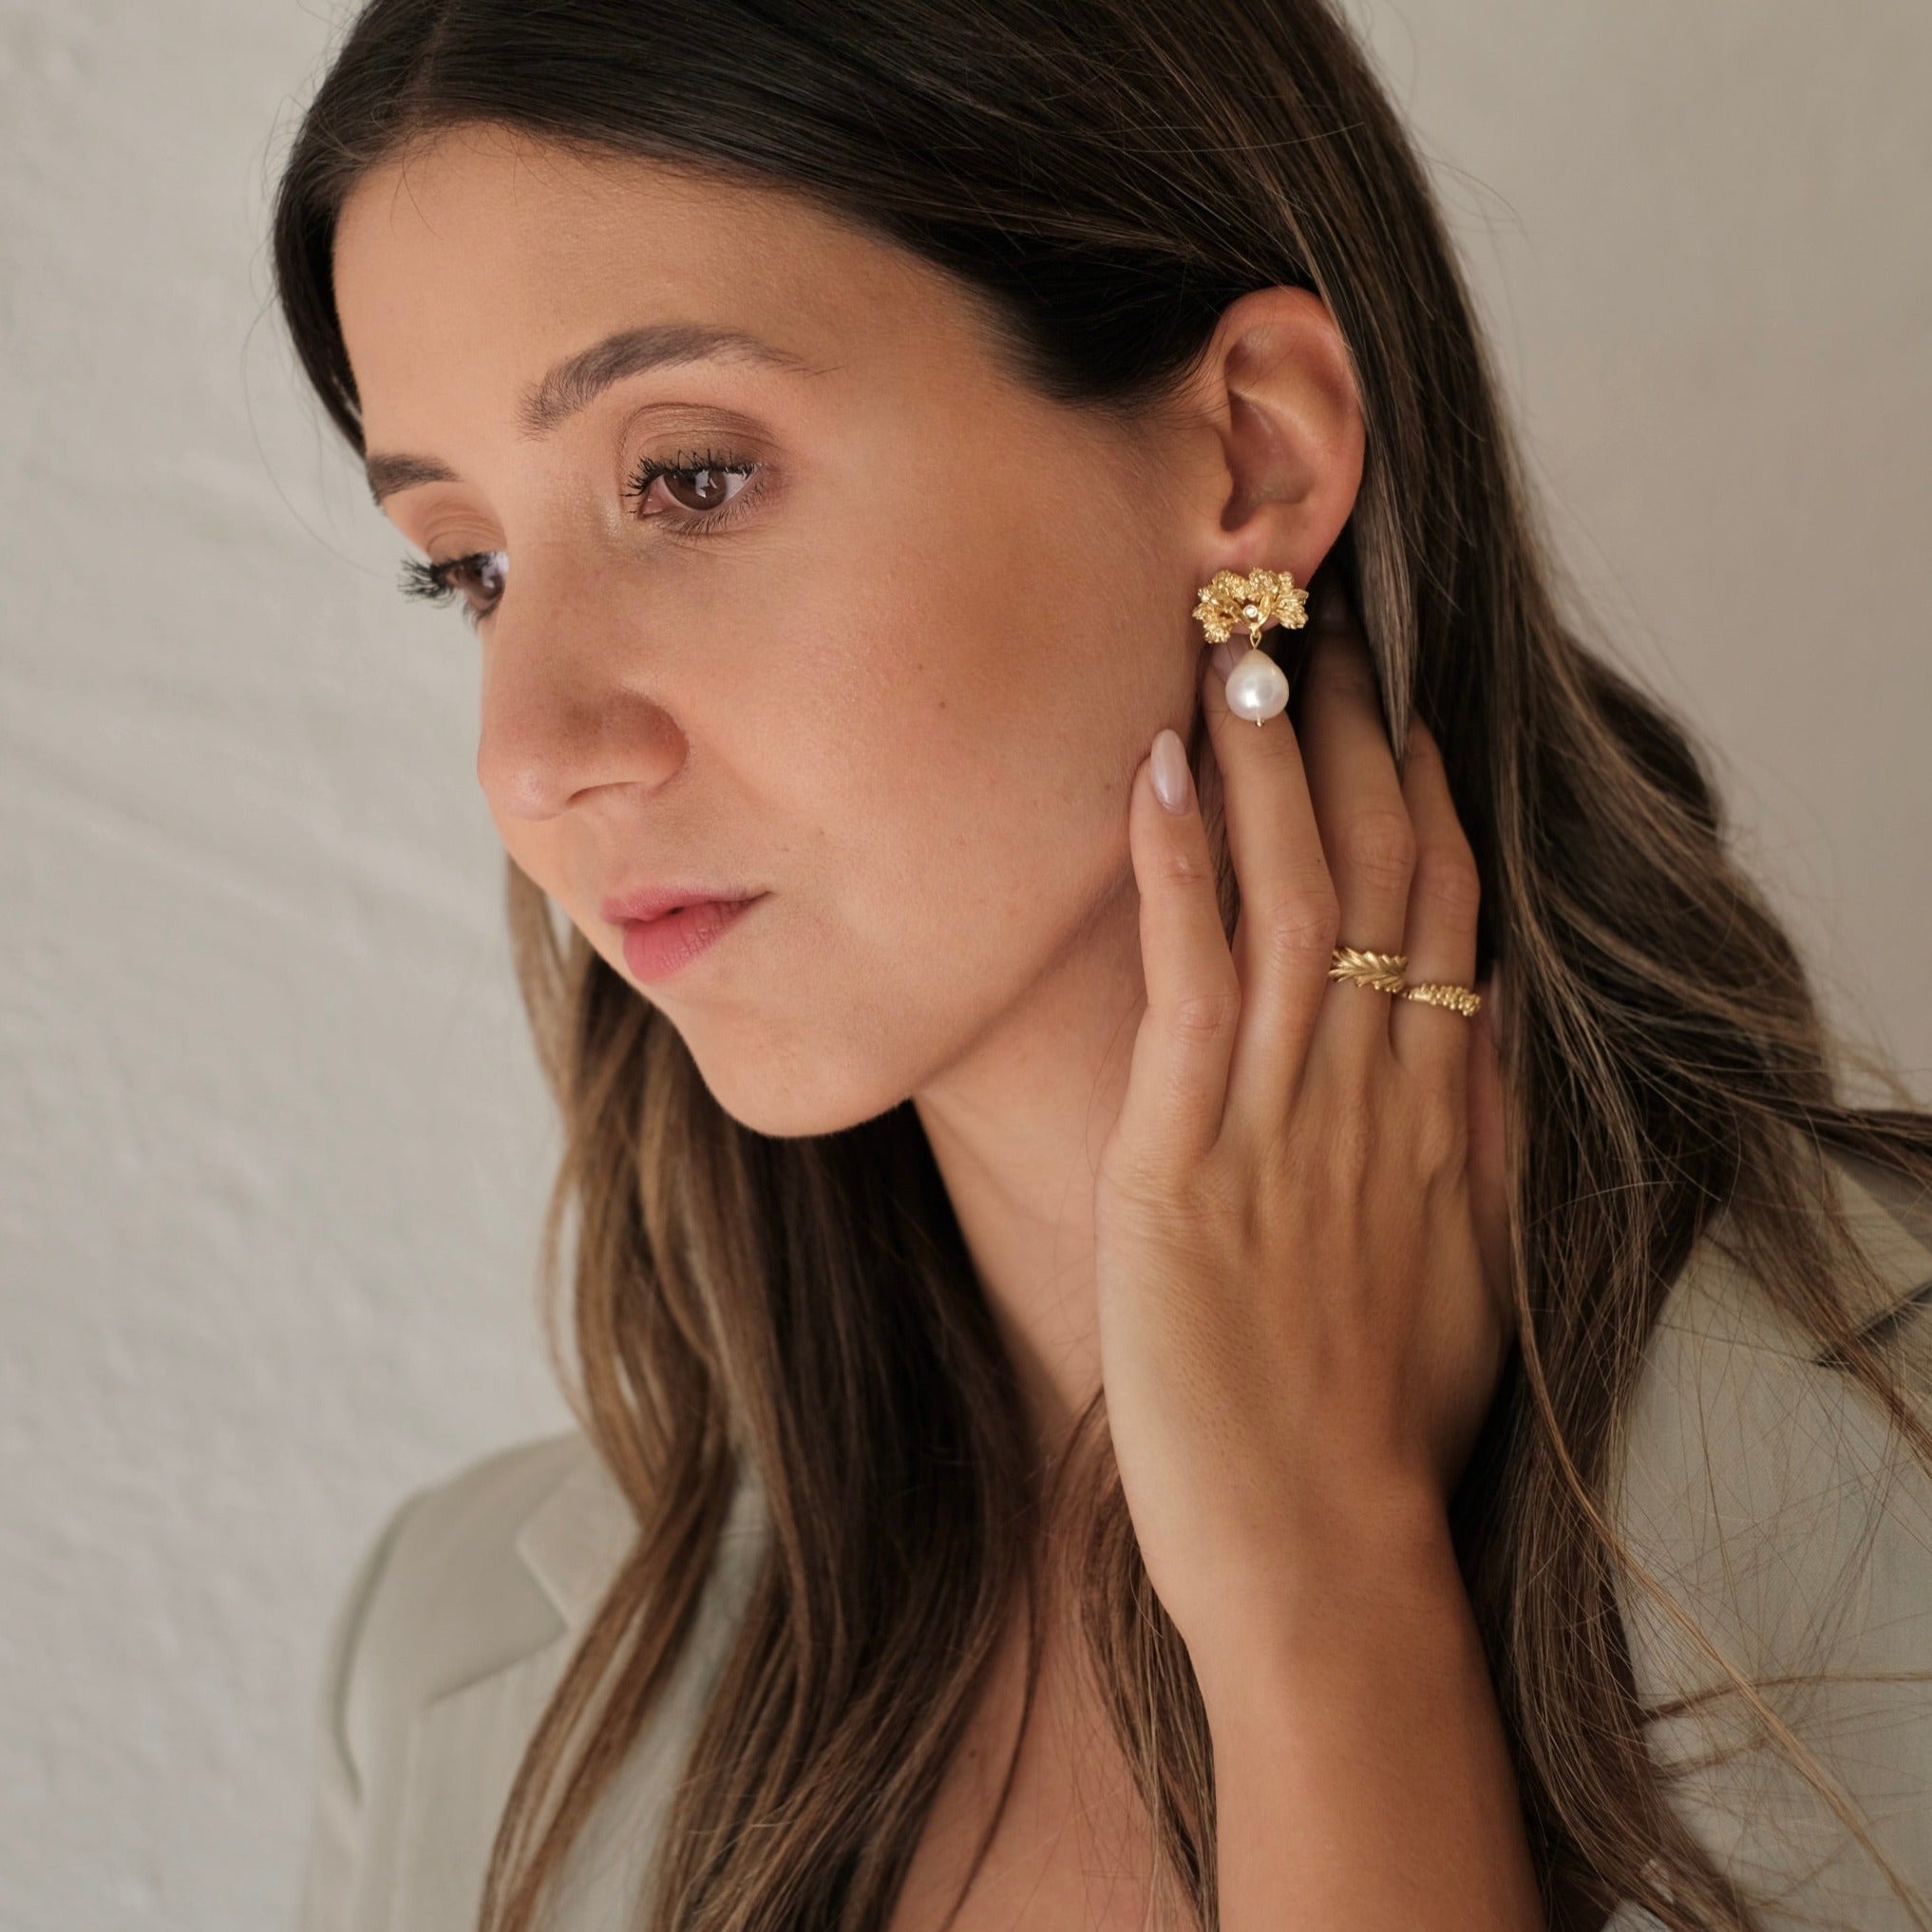 A woman wearing The Pearly Forest Earrings GP by Cremilde Bispo Jewellery and a blazer.